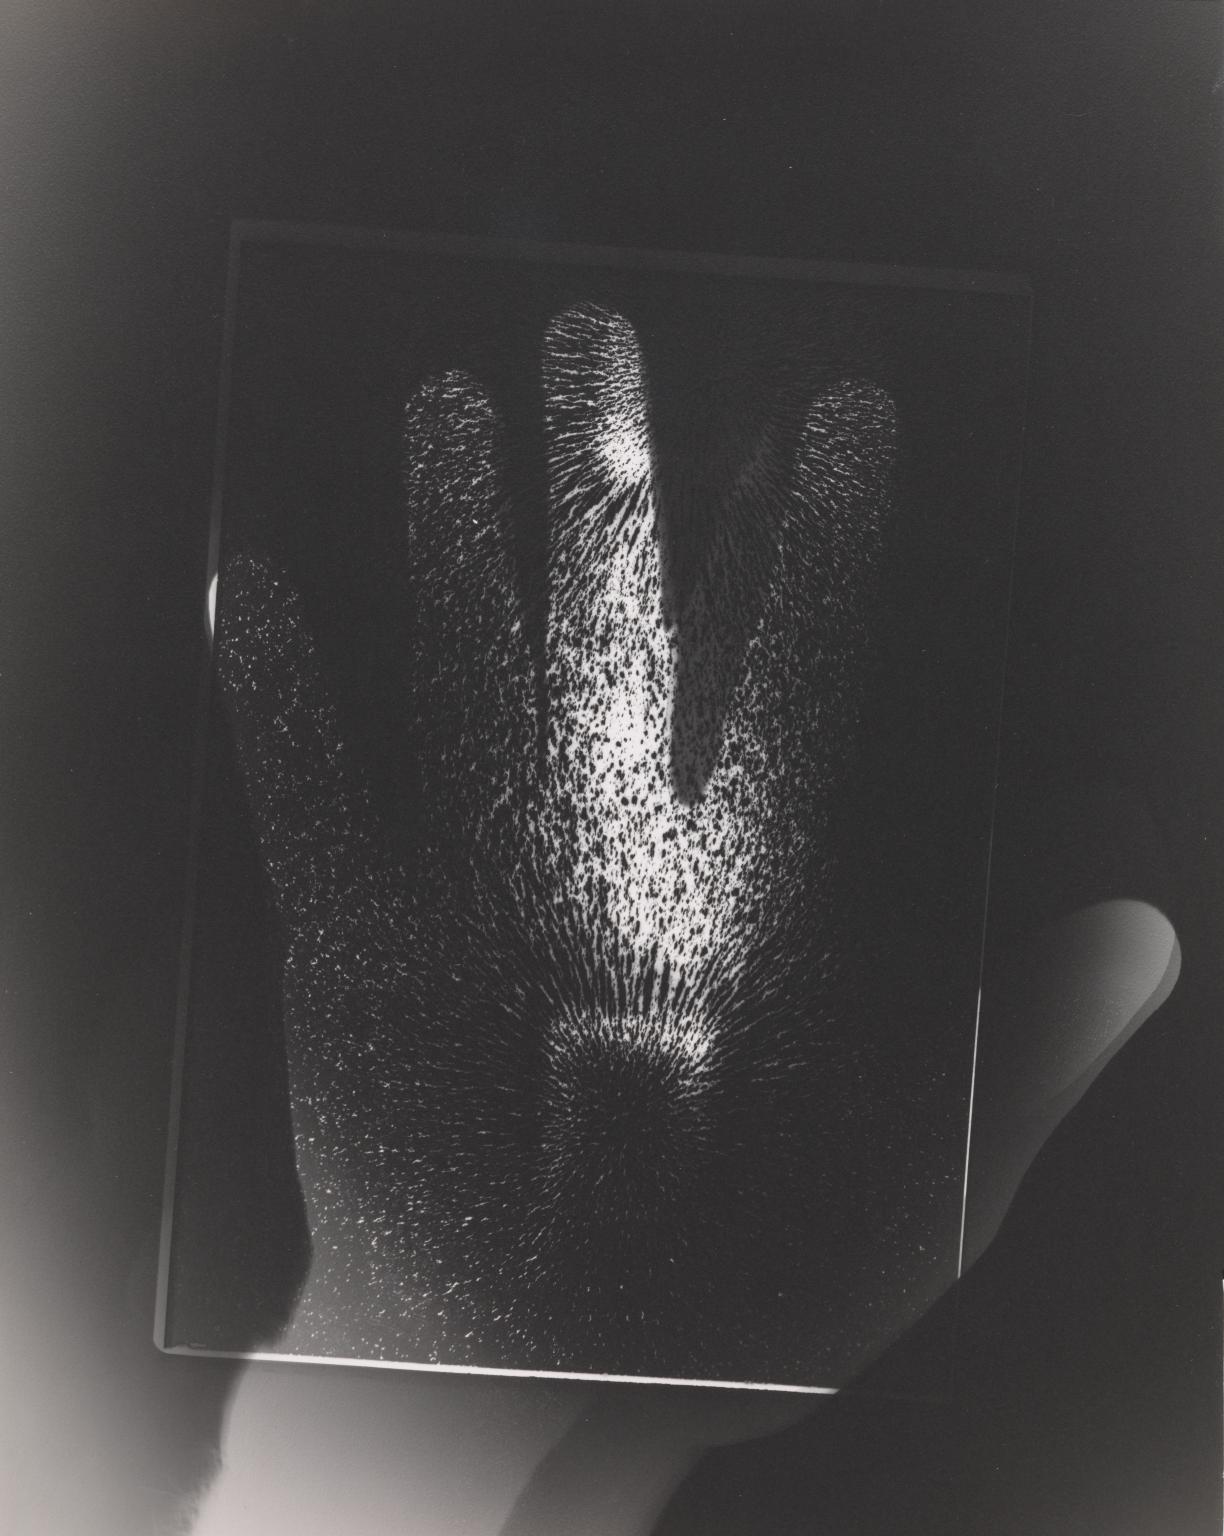 P80552: Hand and Magnet Photogram